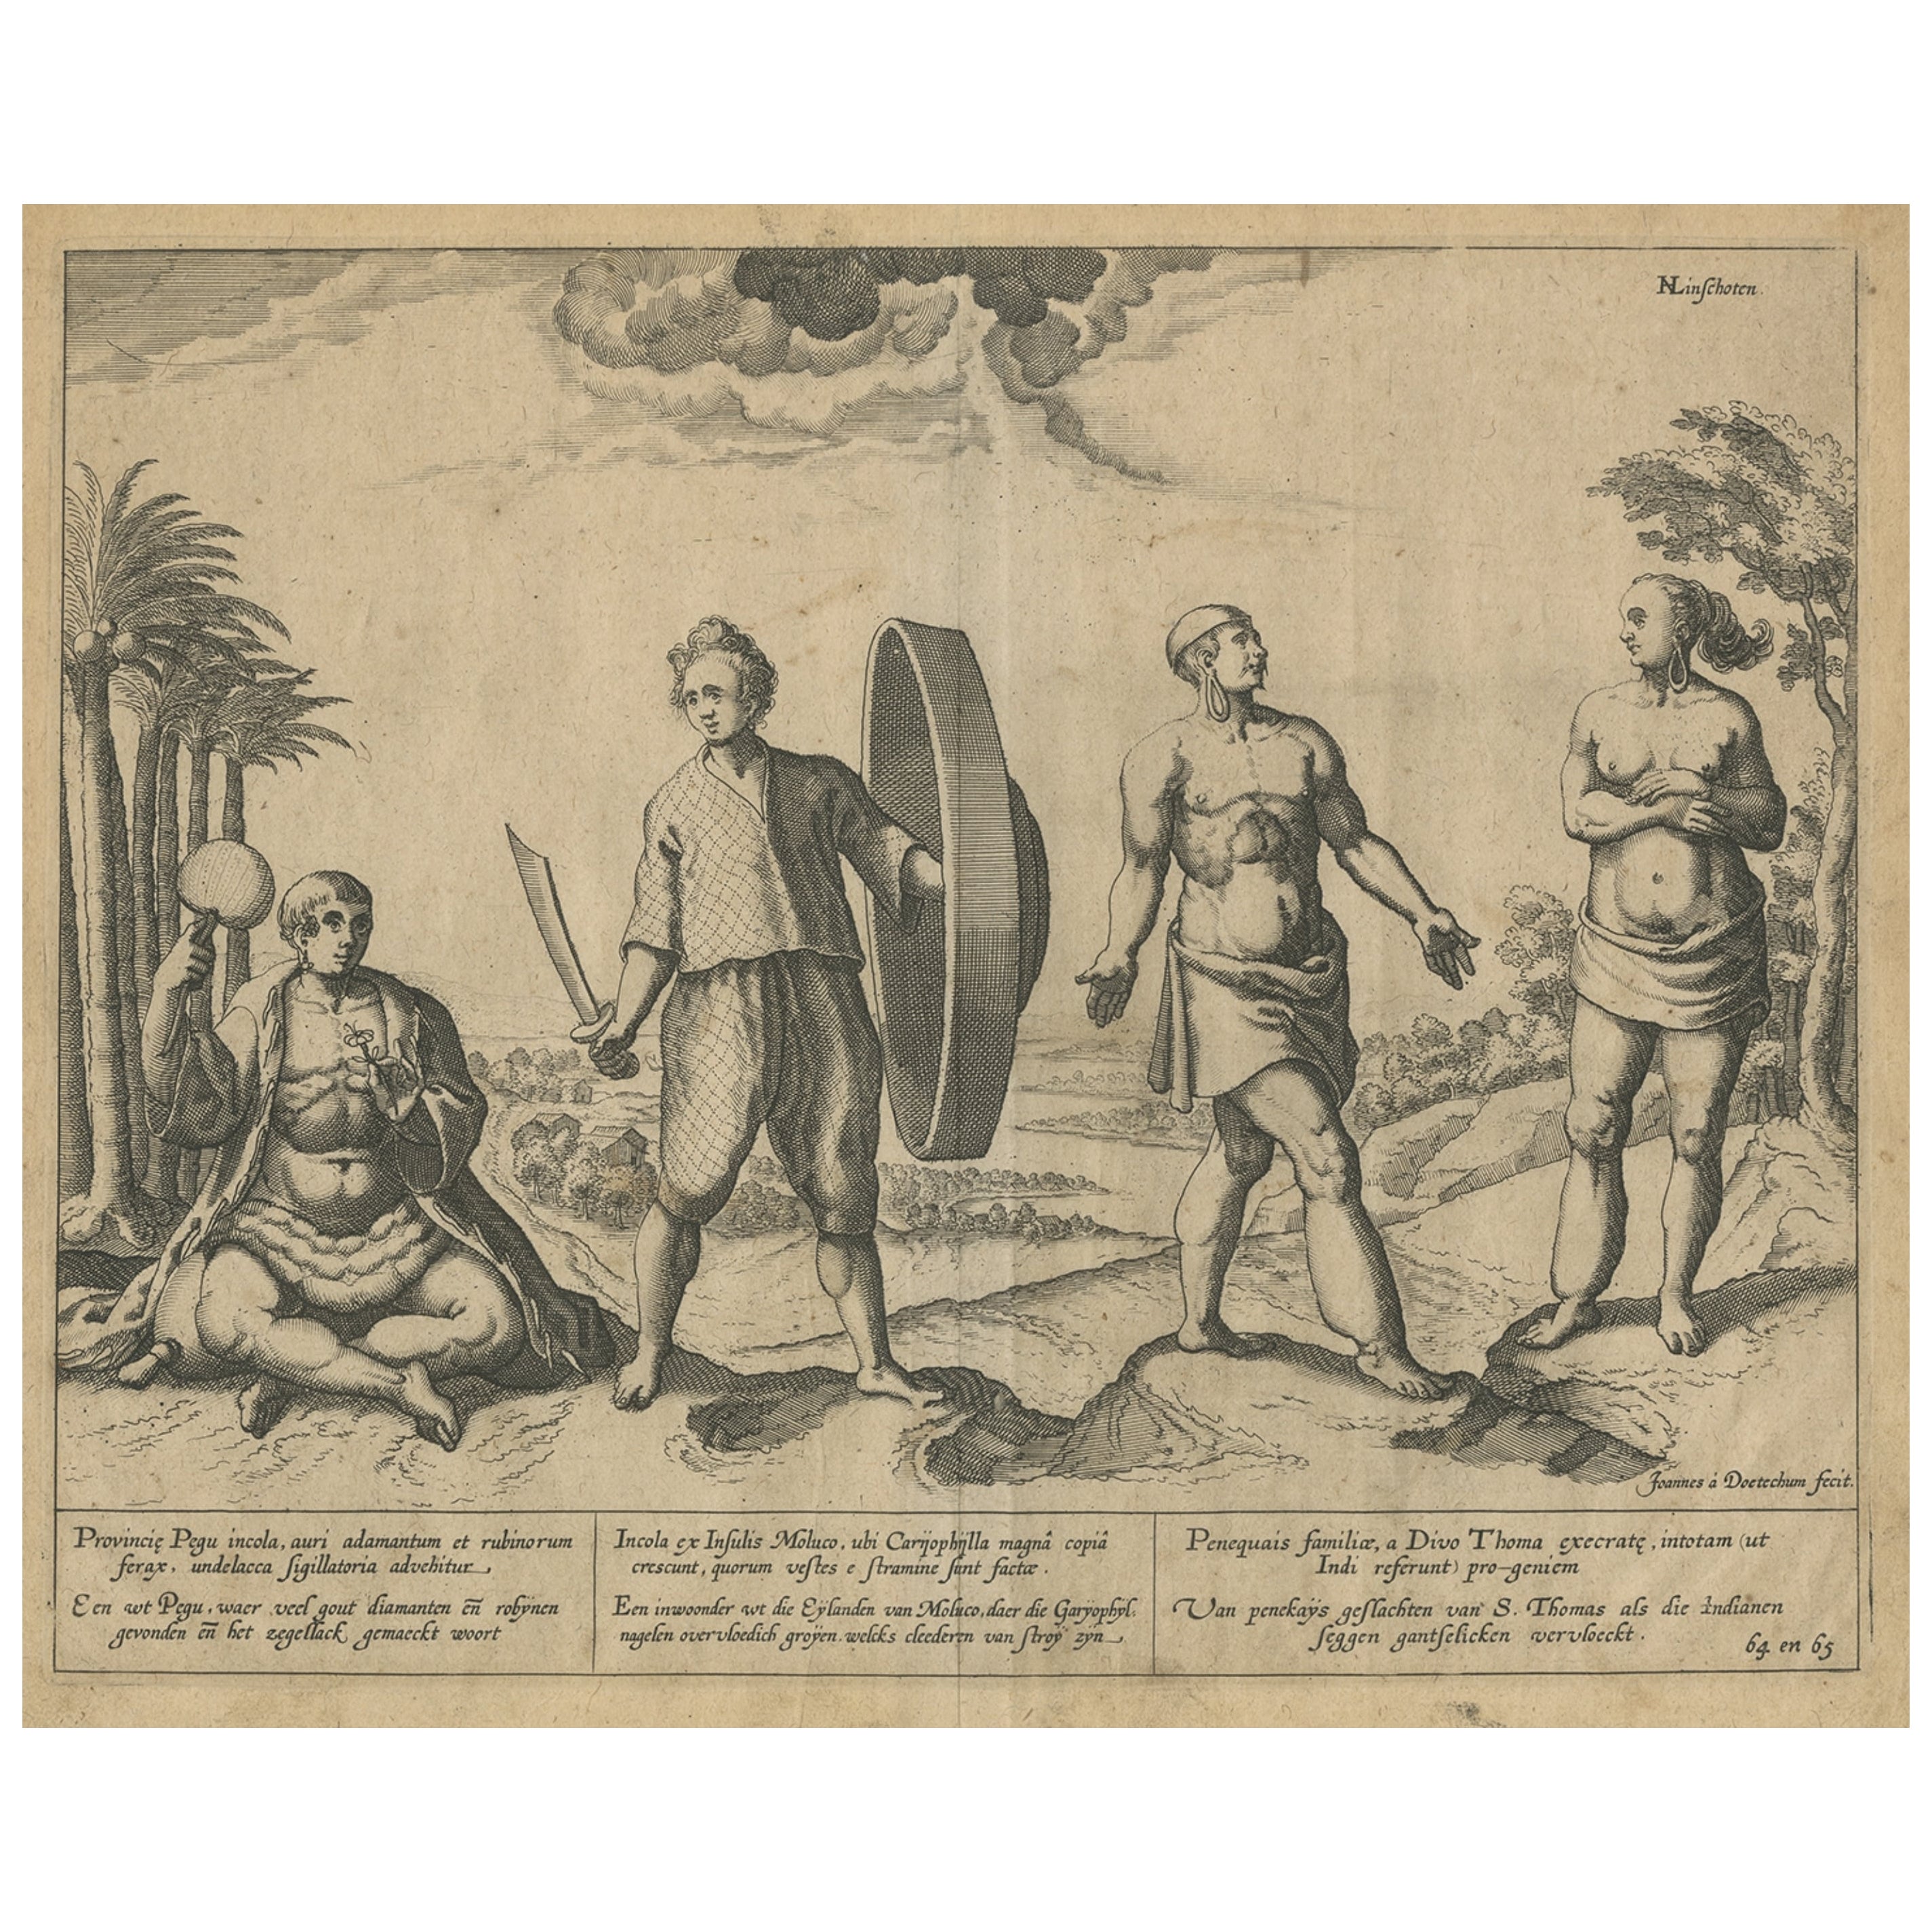 Natives from Pegu, the Moluccan Islands, Penequais Indians and St Thomas, c.1605 For Sale